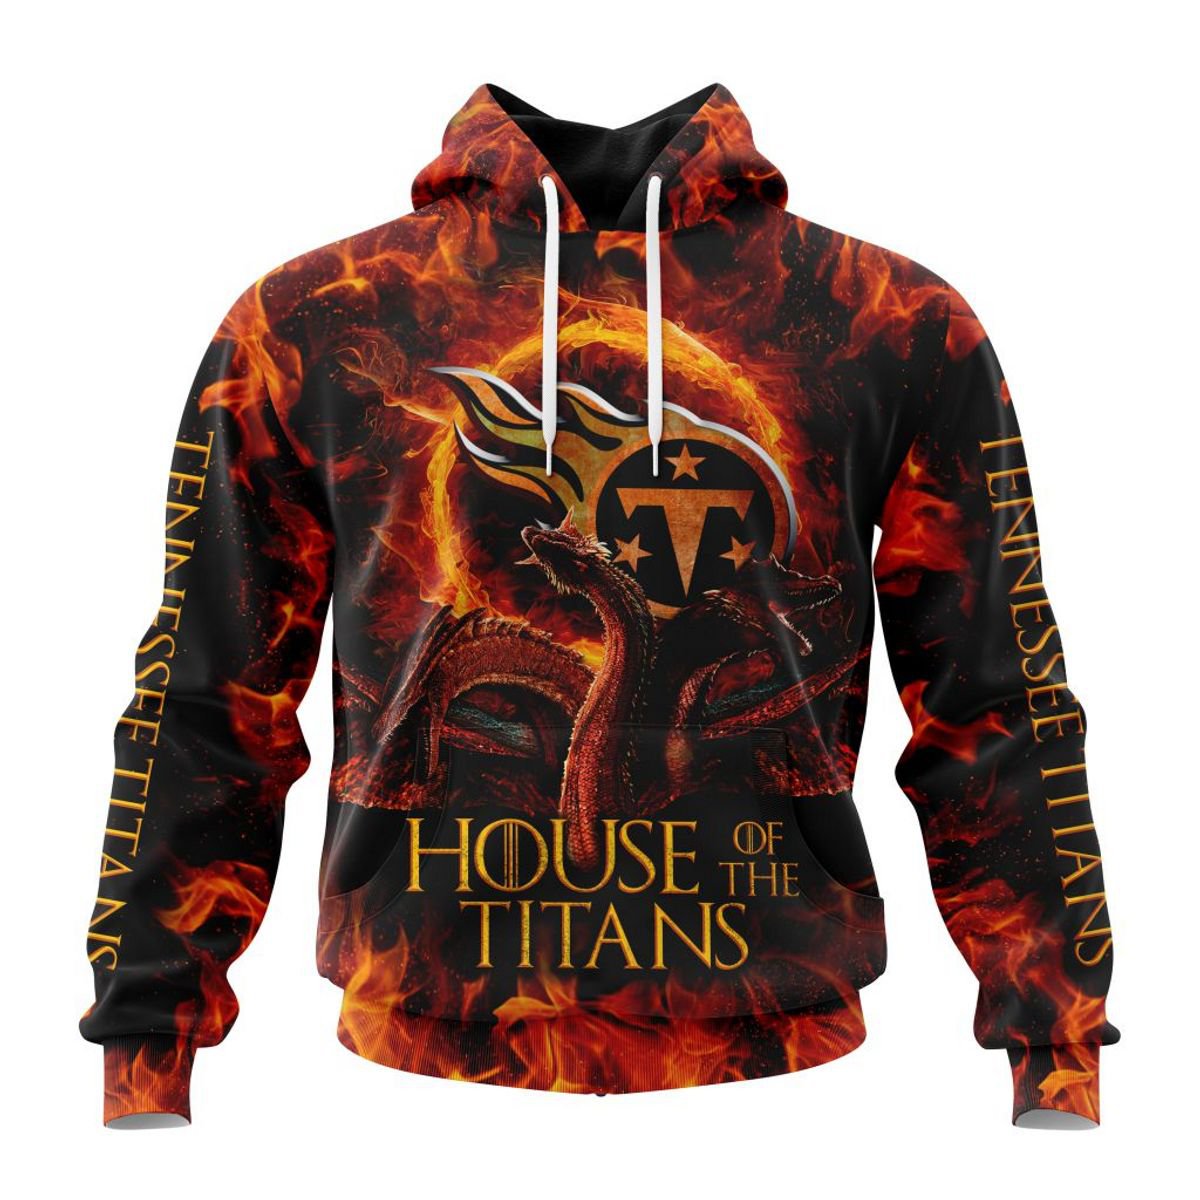 TENNESSEE TITANS GAME OF THRONES – HOUSE OF THE TITANS 3D HOODIE